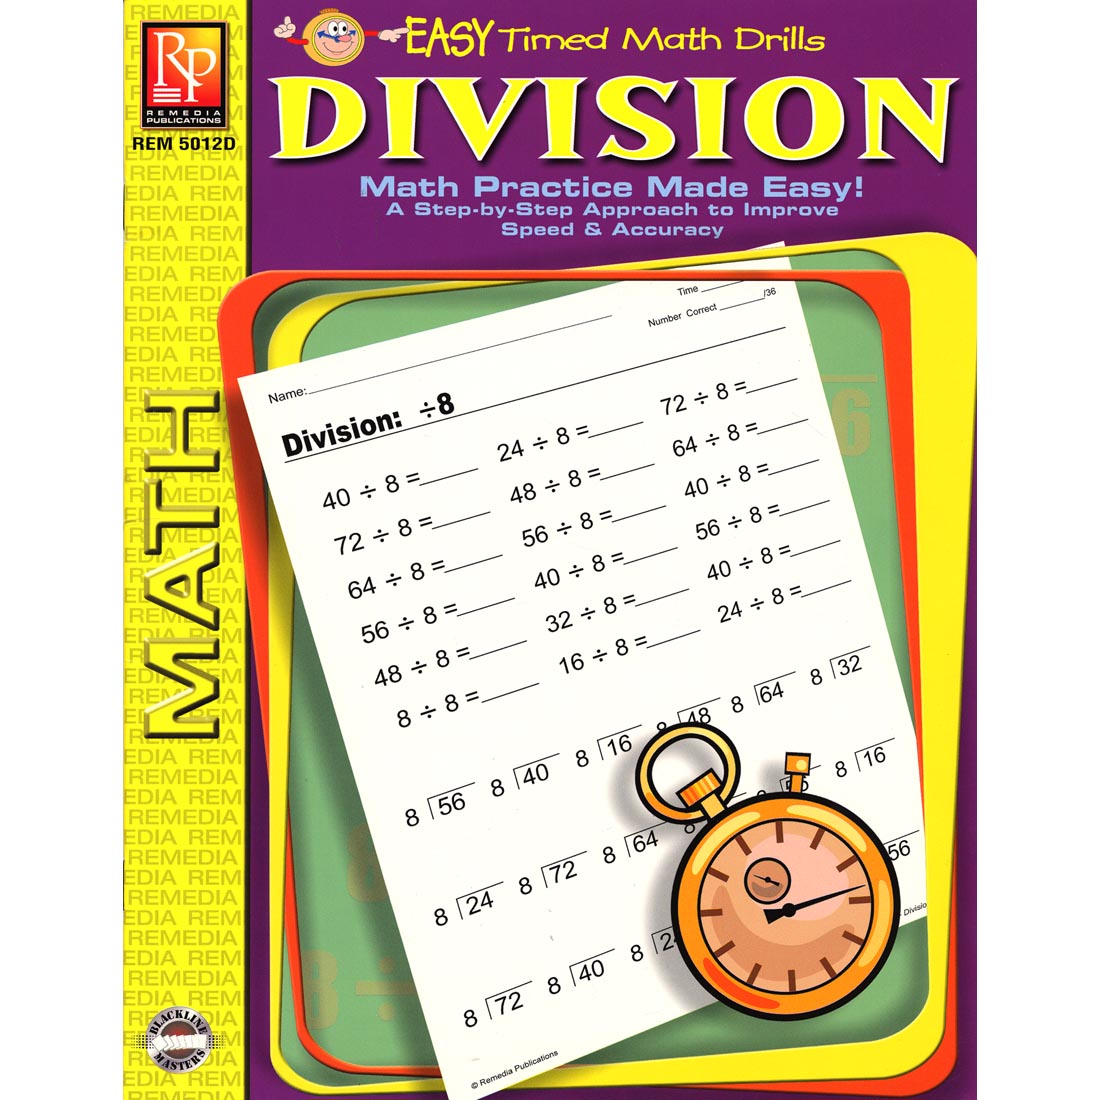 Easy Timed Math Drills Division